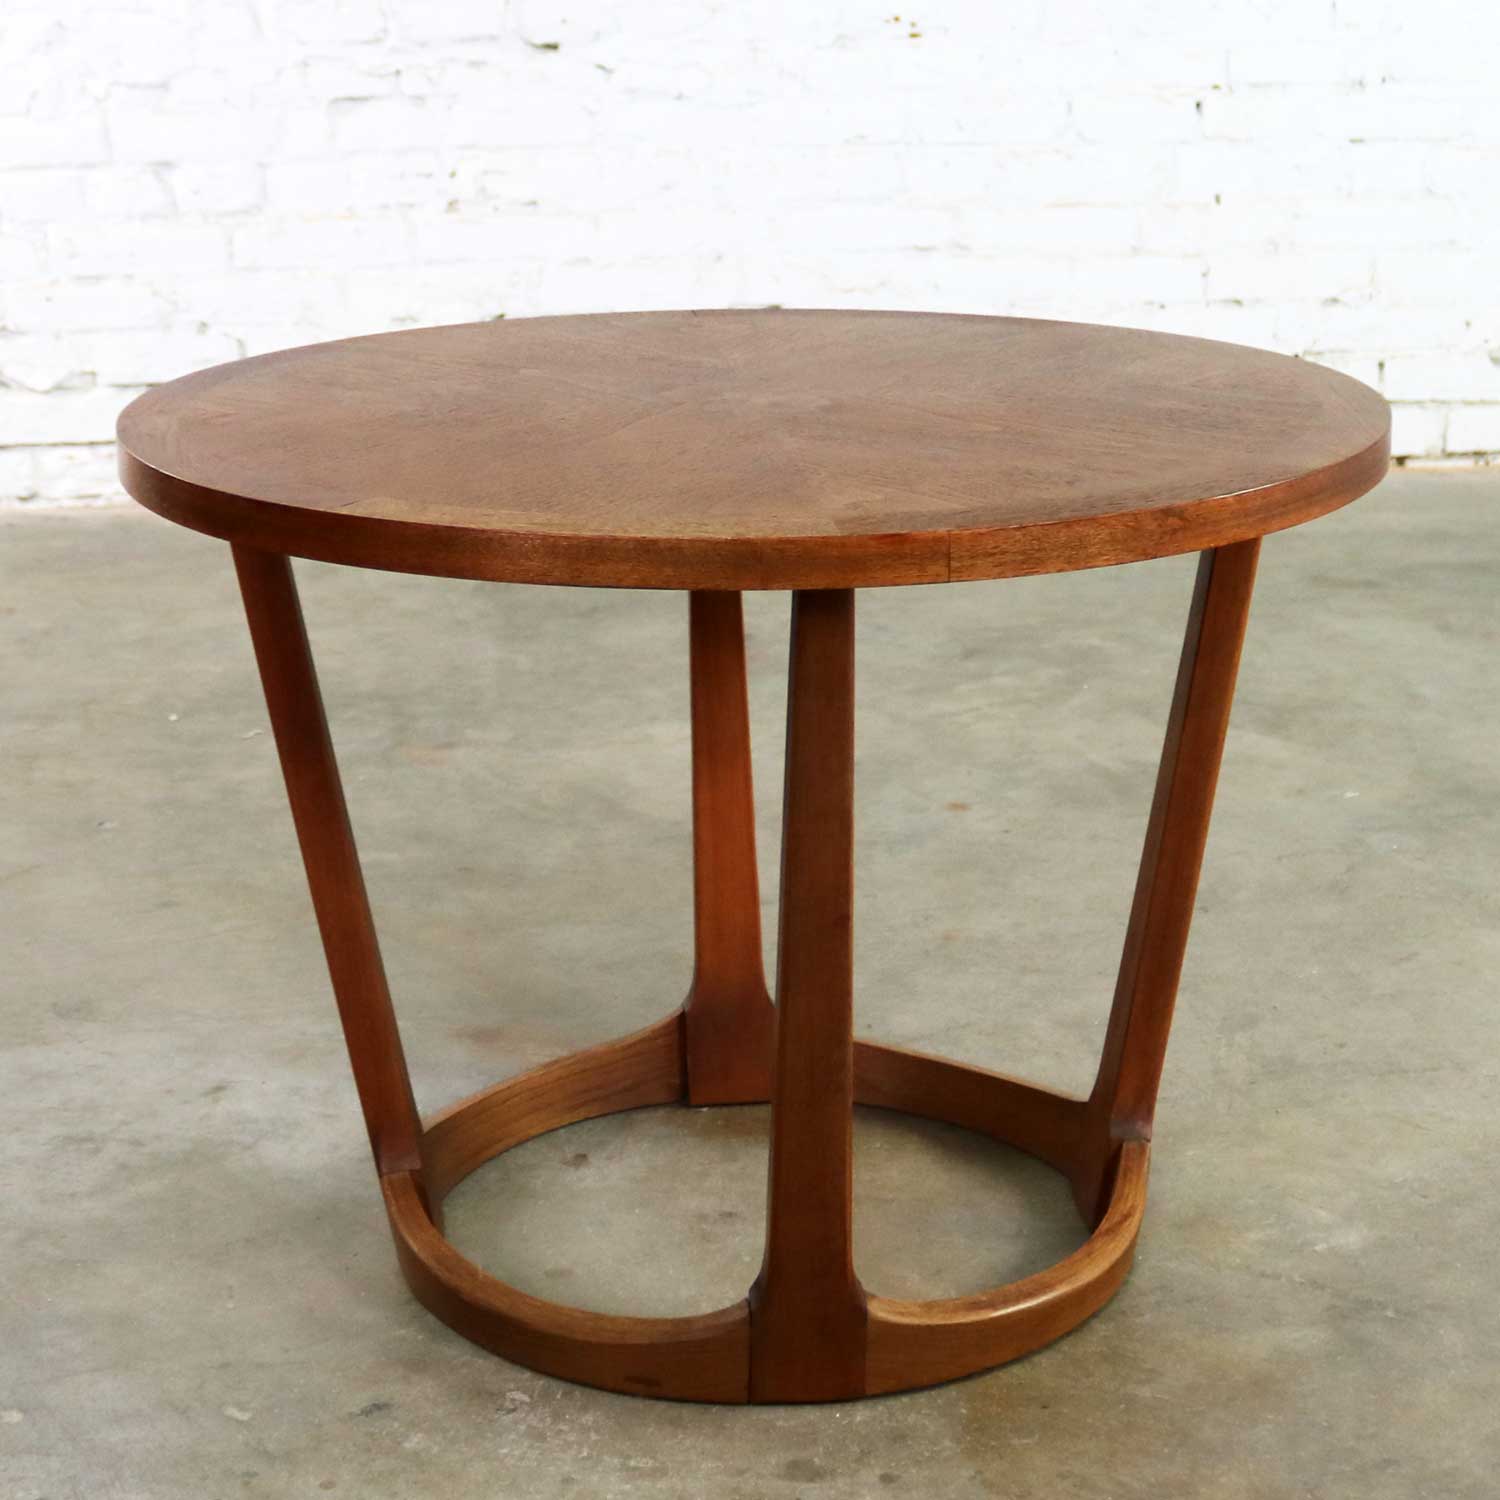 Mid-Century Modern Lane Round Drum End Table 997-22 from the Rhythm Collection